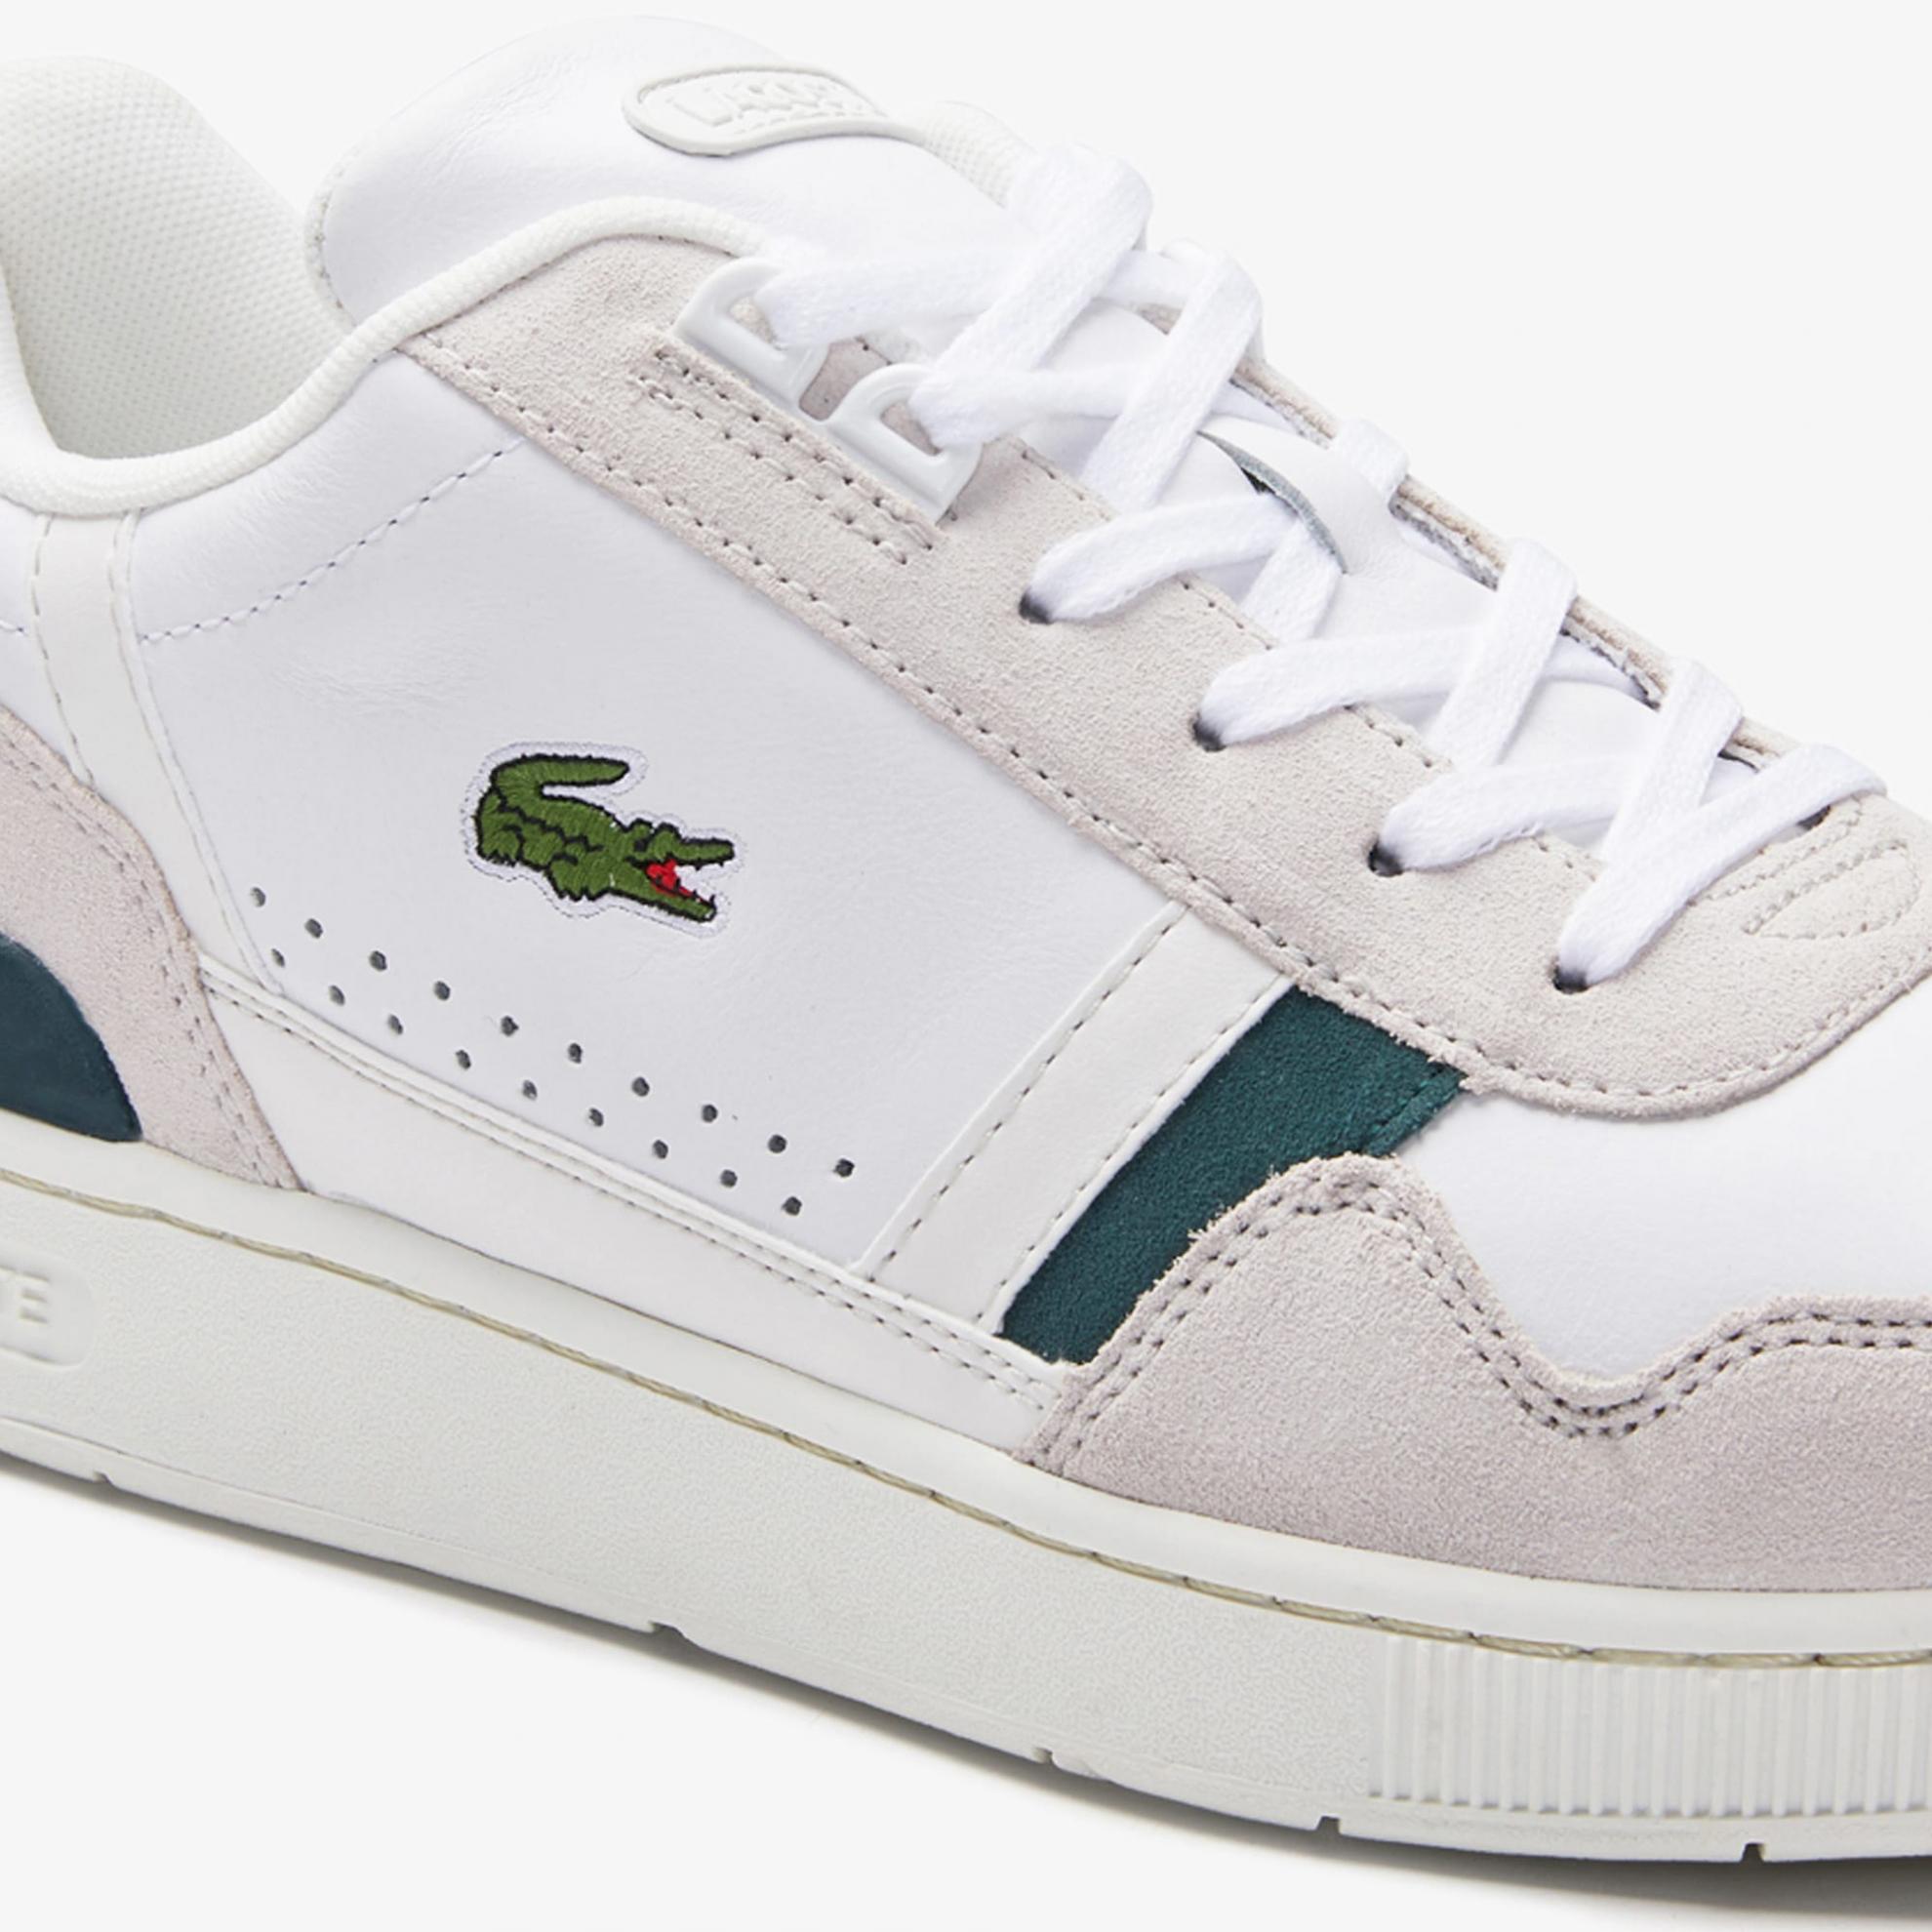 Sneakers | Mens Lacoste T-Clip Leather and Suede Trainers OFF WHT/DK ...